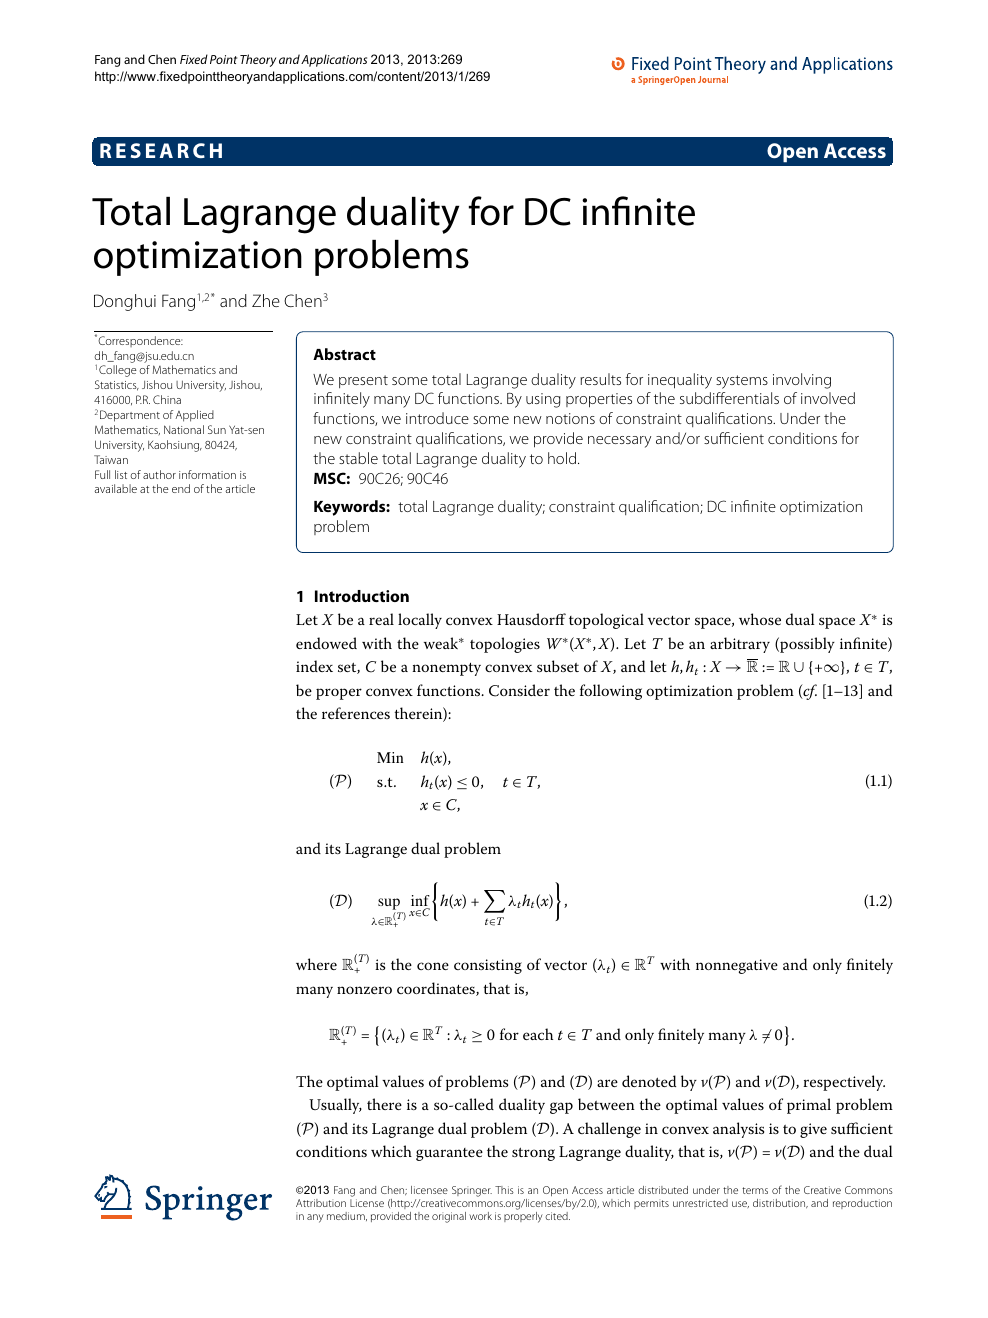 Total Lagrange Duality For Dc Infinite Optimization Problems Topic Of Research Paper In Mathematics Download Scholarly Article Pdf And Read For Free On Cyberleninka Open Science Hub